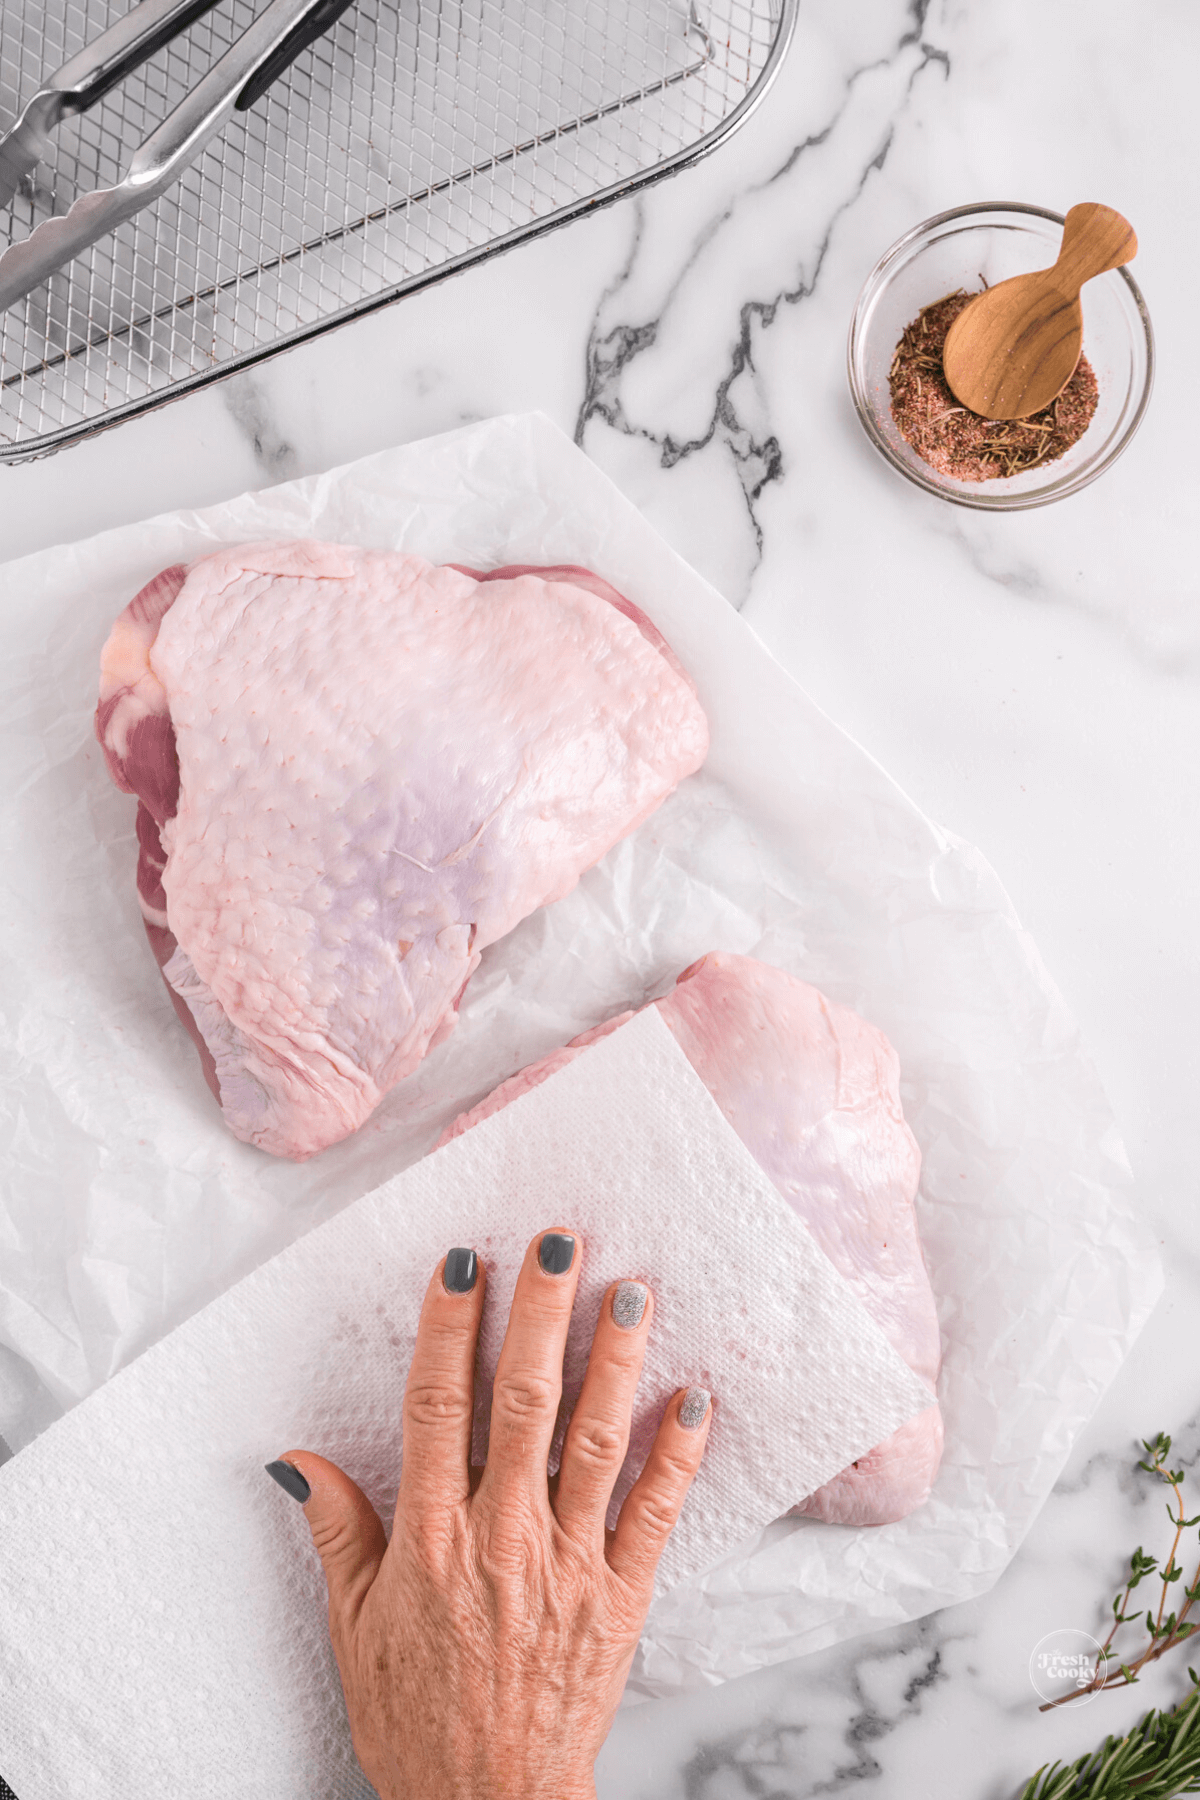 Pat dry turkey thighs with paper towels. 